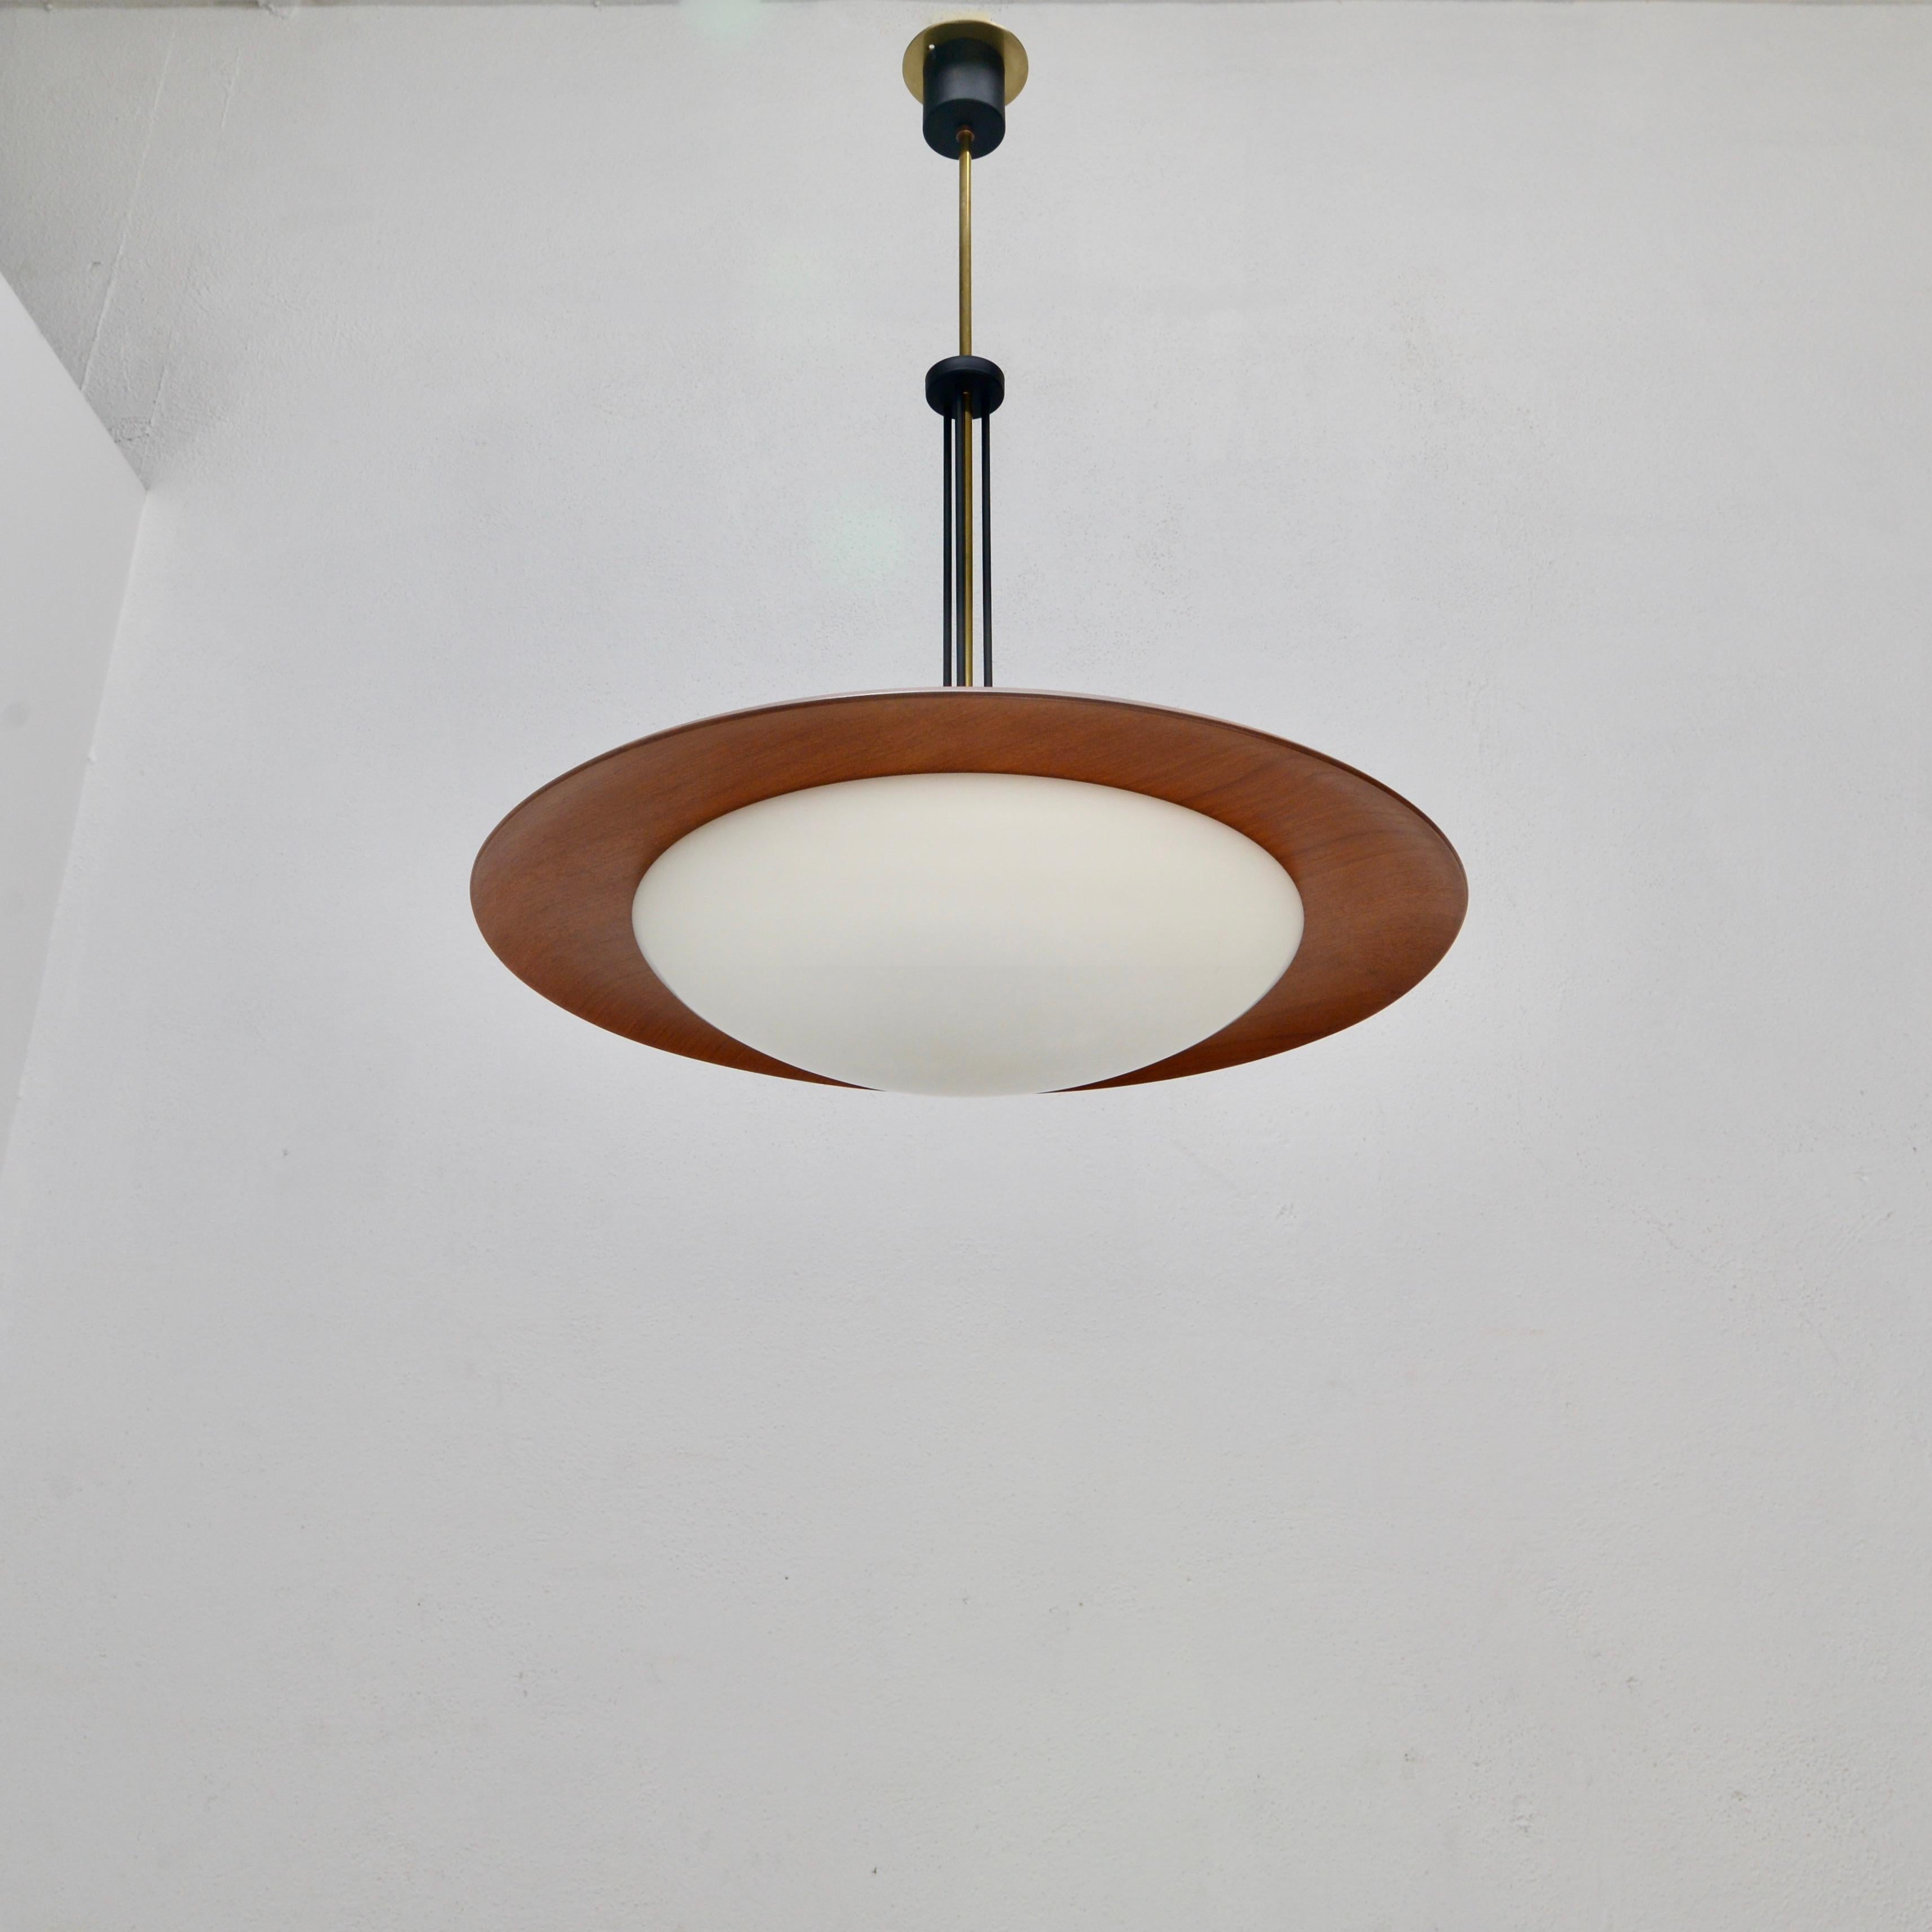 Classic midcentury Italian teak Omni pendant from the 1950s in brass, wood, glass and steel. Wired with a single E26 medium based socket and wired for use in the US. Light bulb included with order.
Measurements:
OAD: 34” 
Diameter: 24”
Fixture